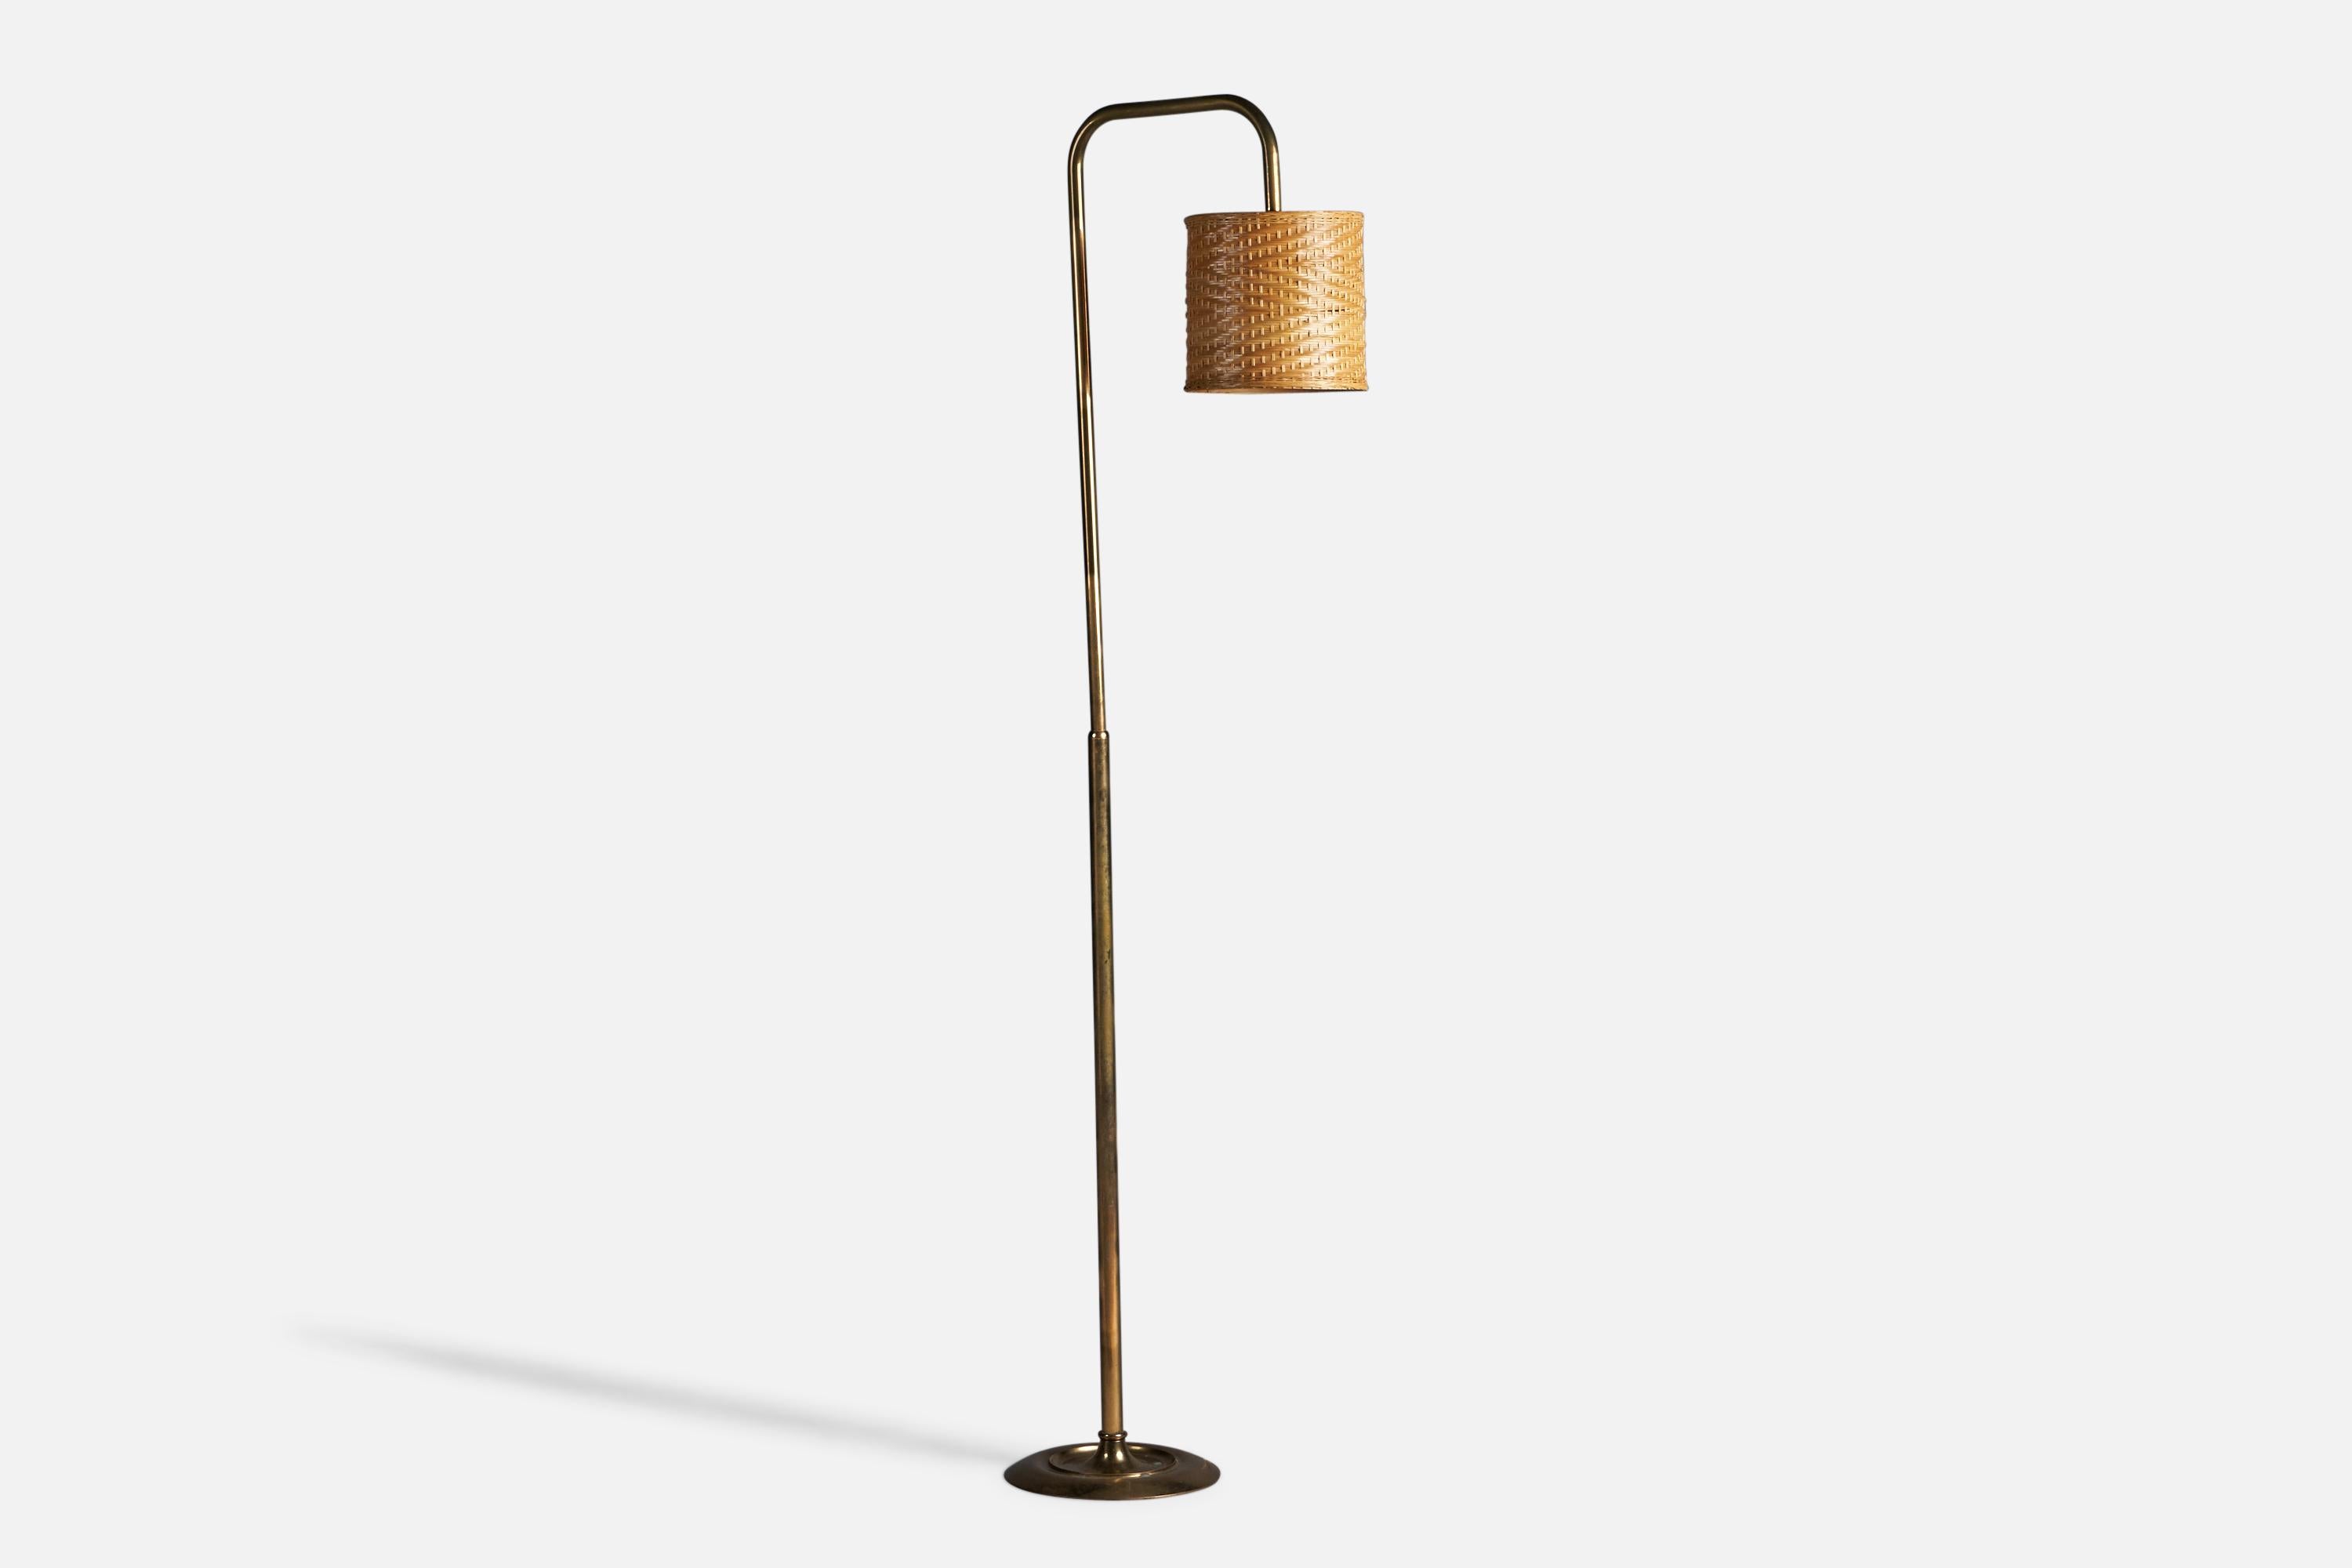 A brass and rattan floor lamp, designed and produced in Italy, c. 1960s.

Overall Dimensions (inches): 74.25